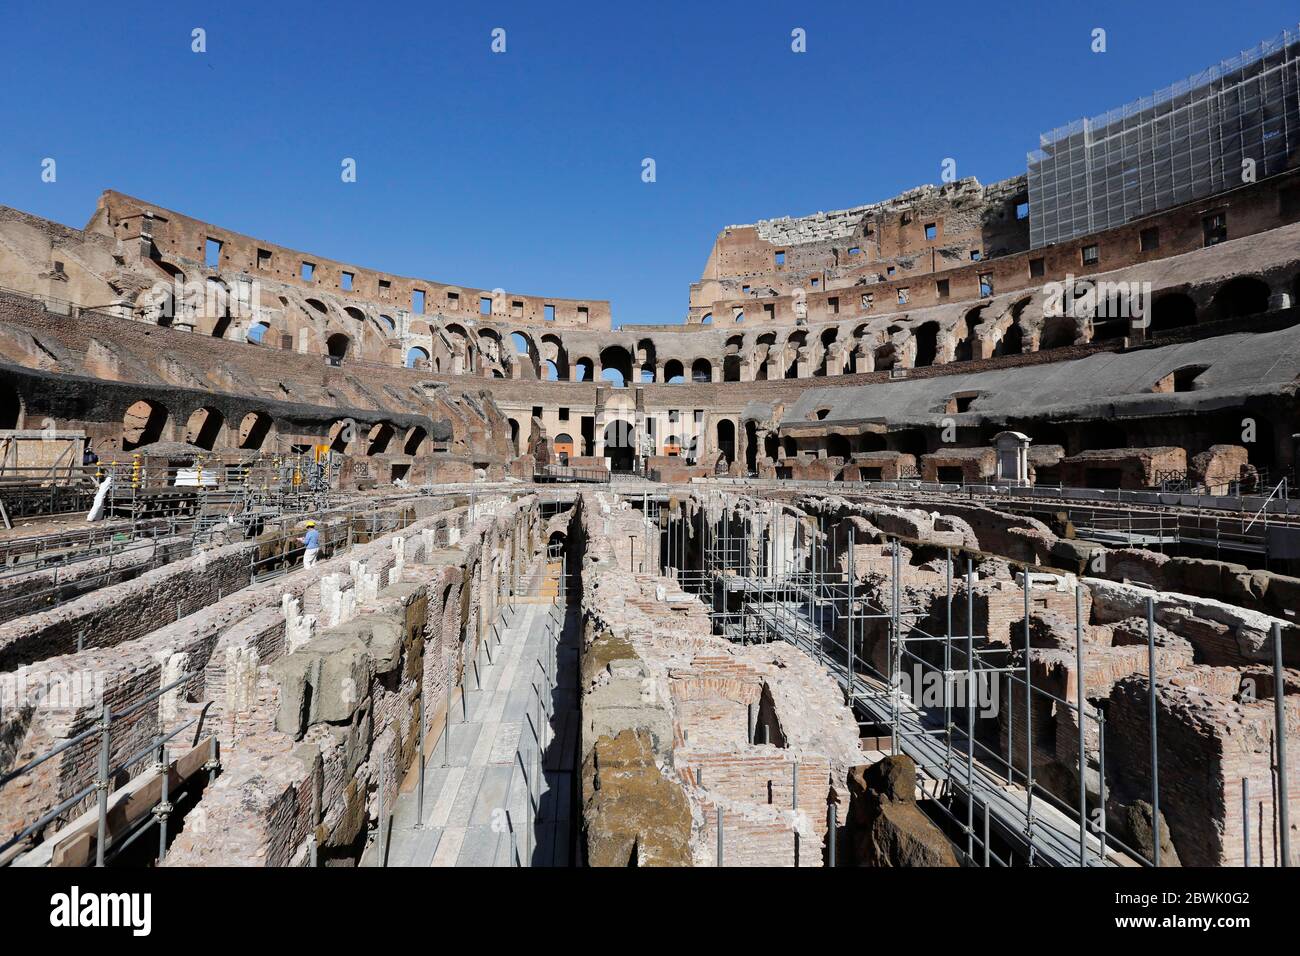 Rome, Italy. 01st June, 2020. An internal view of the Colosseum. The monument and other landmarks of its Archeological Park, such as Roman Forum, Palatine Hill and Domus Aurea, reopen to the public after more than two months of closure due to the Covid-19 pandemic. Credit: Riccardo De Luca - Update Images/Alamy Live News Stock Photo